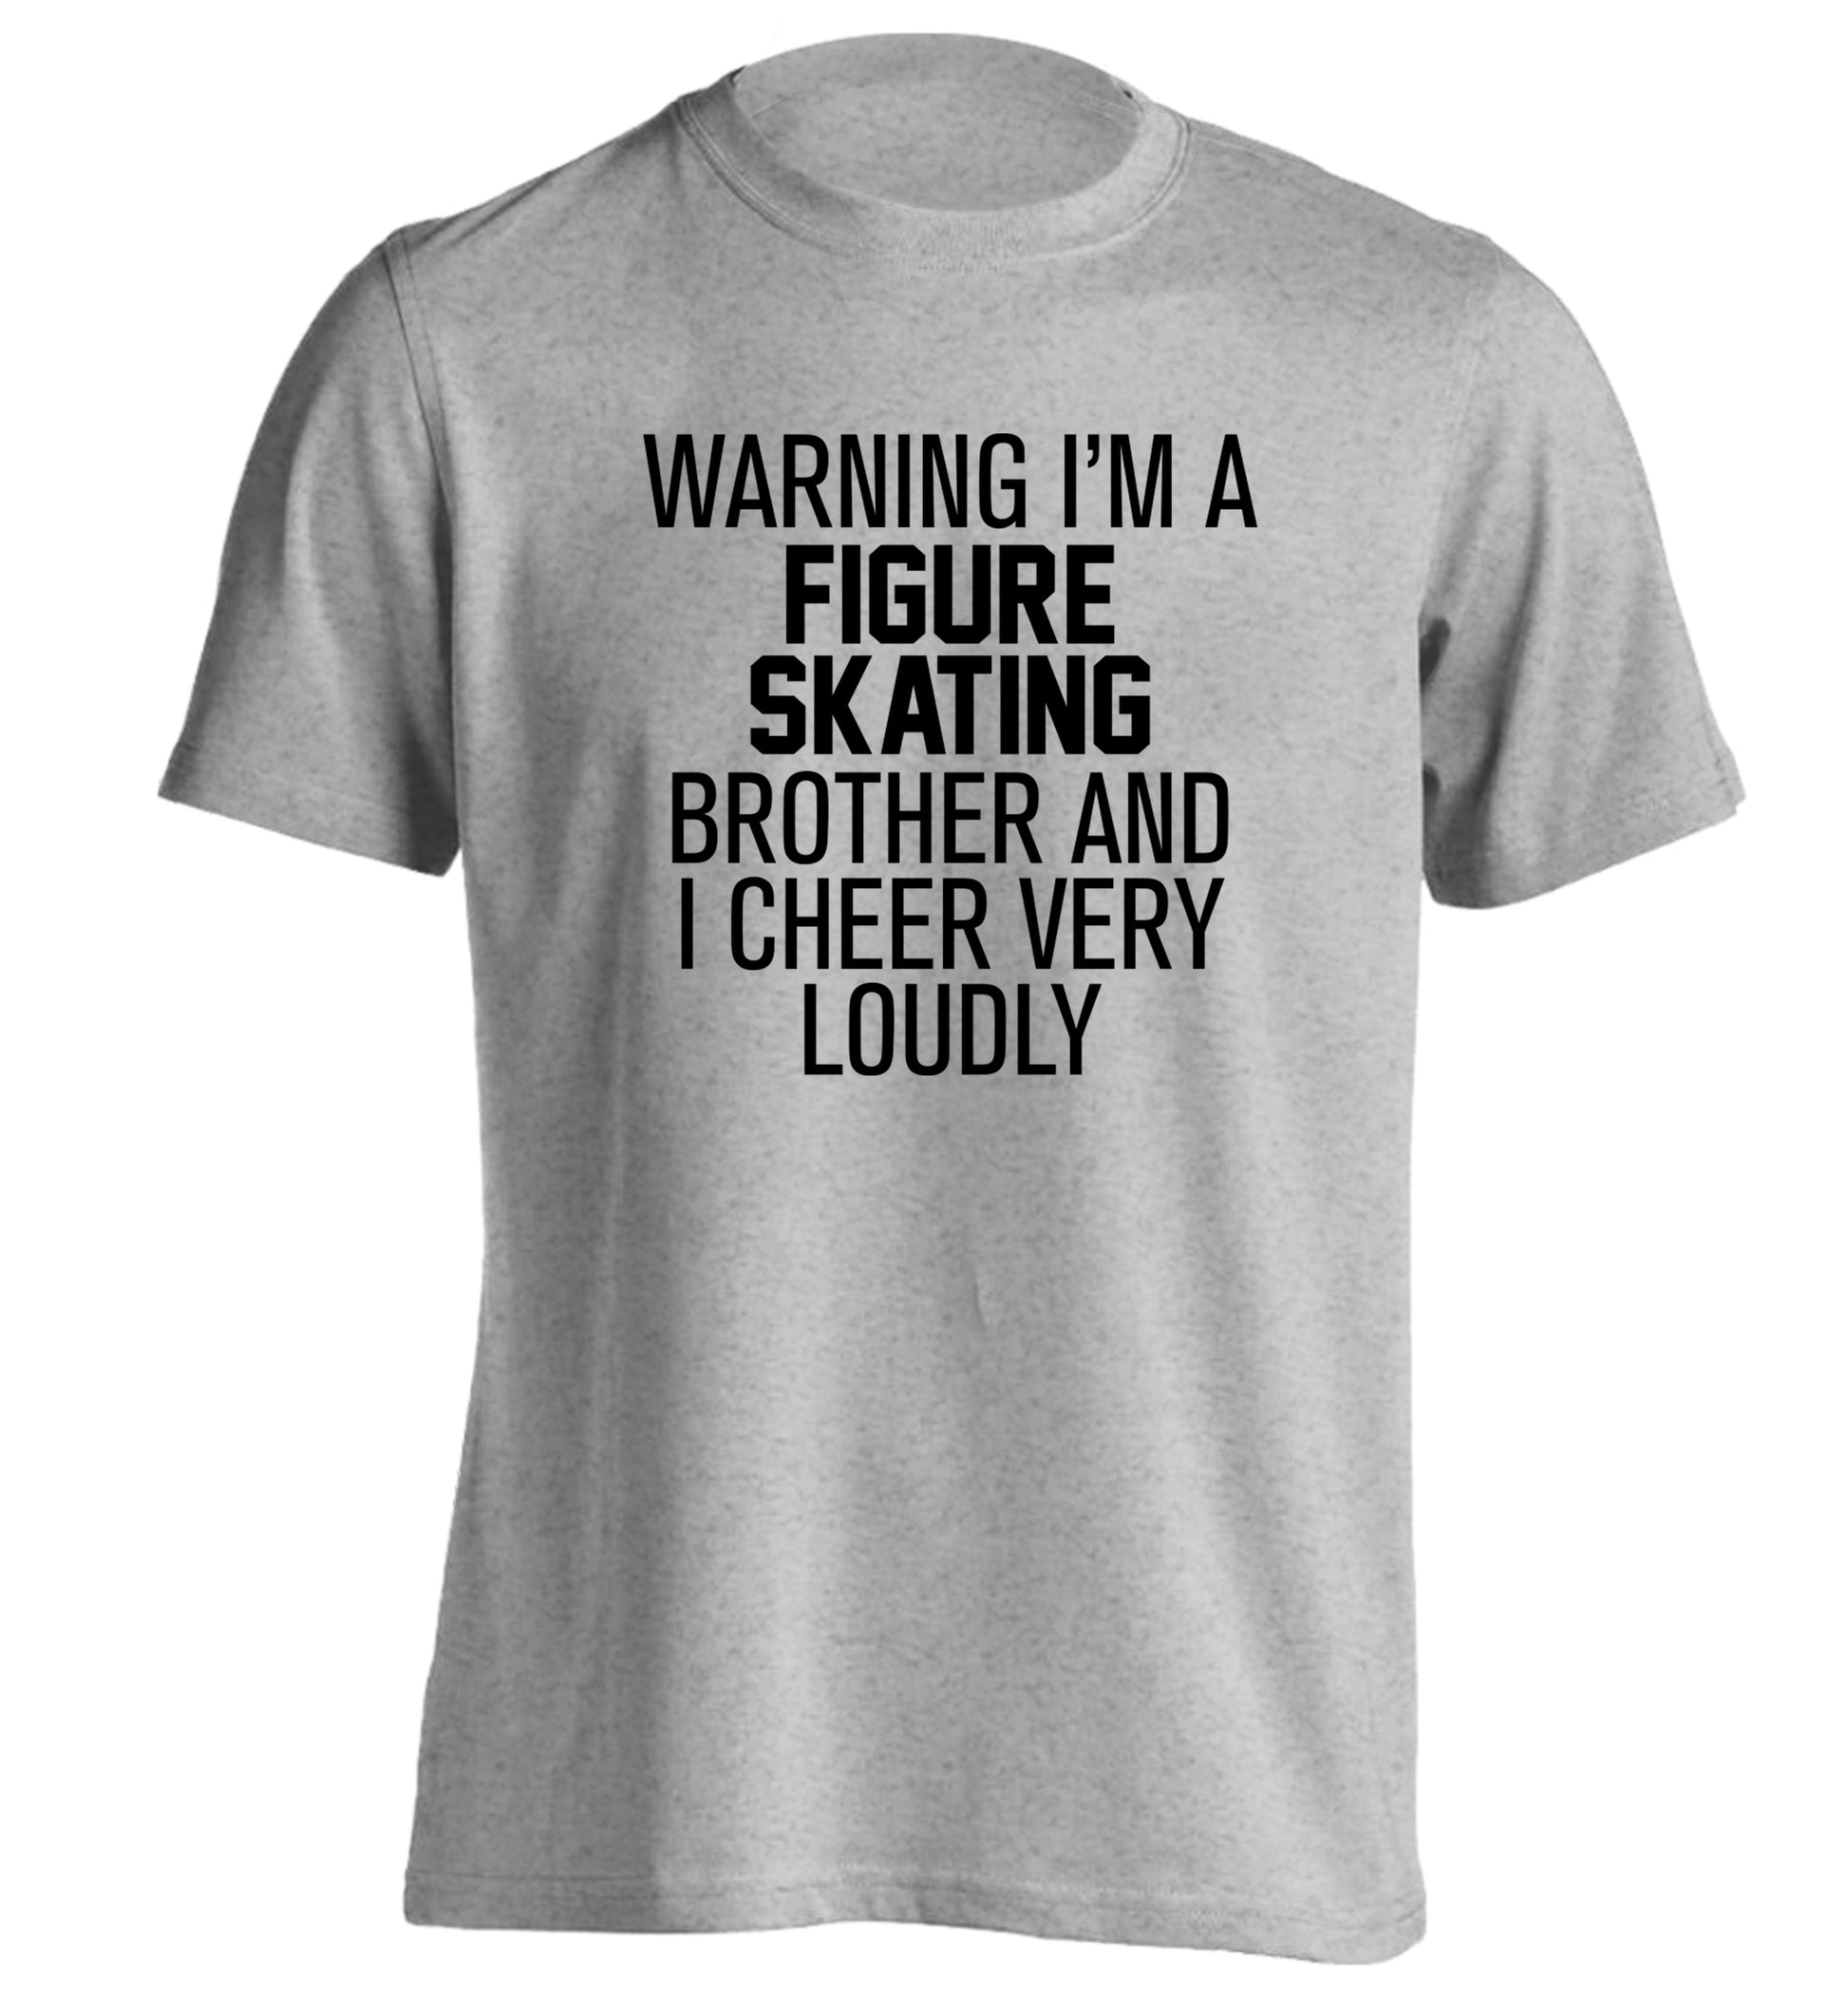 Warning I'm a figure skating brother and I cheer very loudly adults unisexgrey Tshirt 2XL